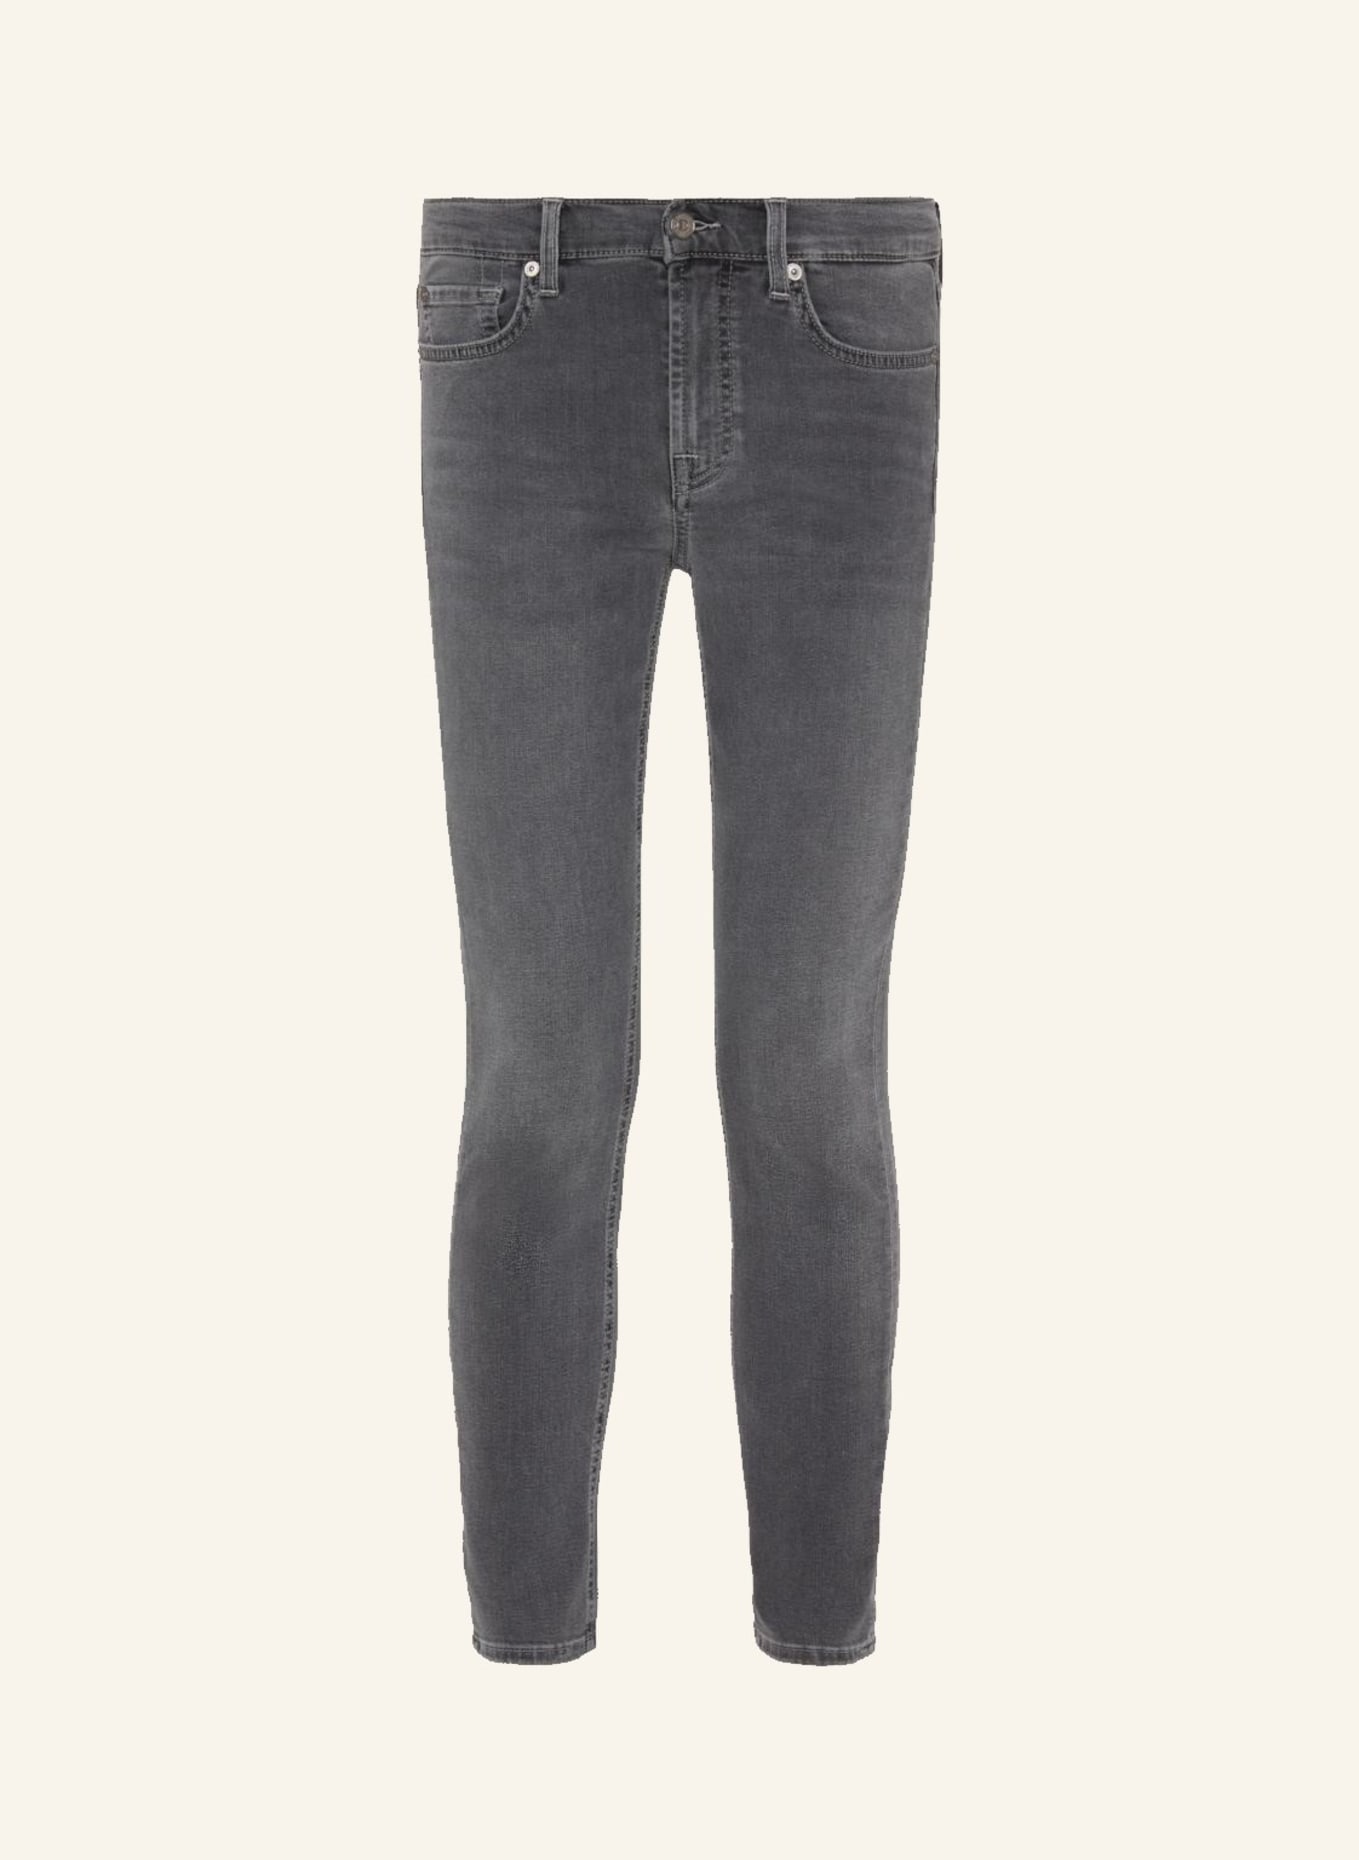 7 for all mankind Jeans THE ANKLE SKINNY Skinny Fit, Farbe: GRAU (Bild 1)